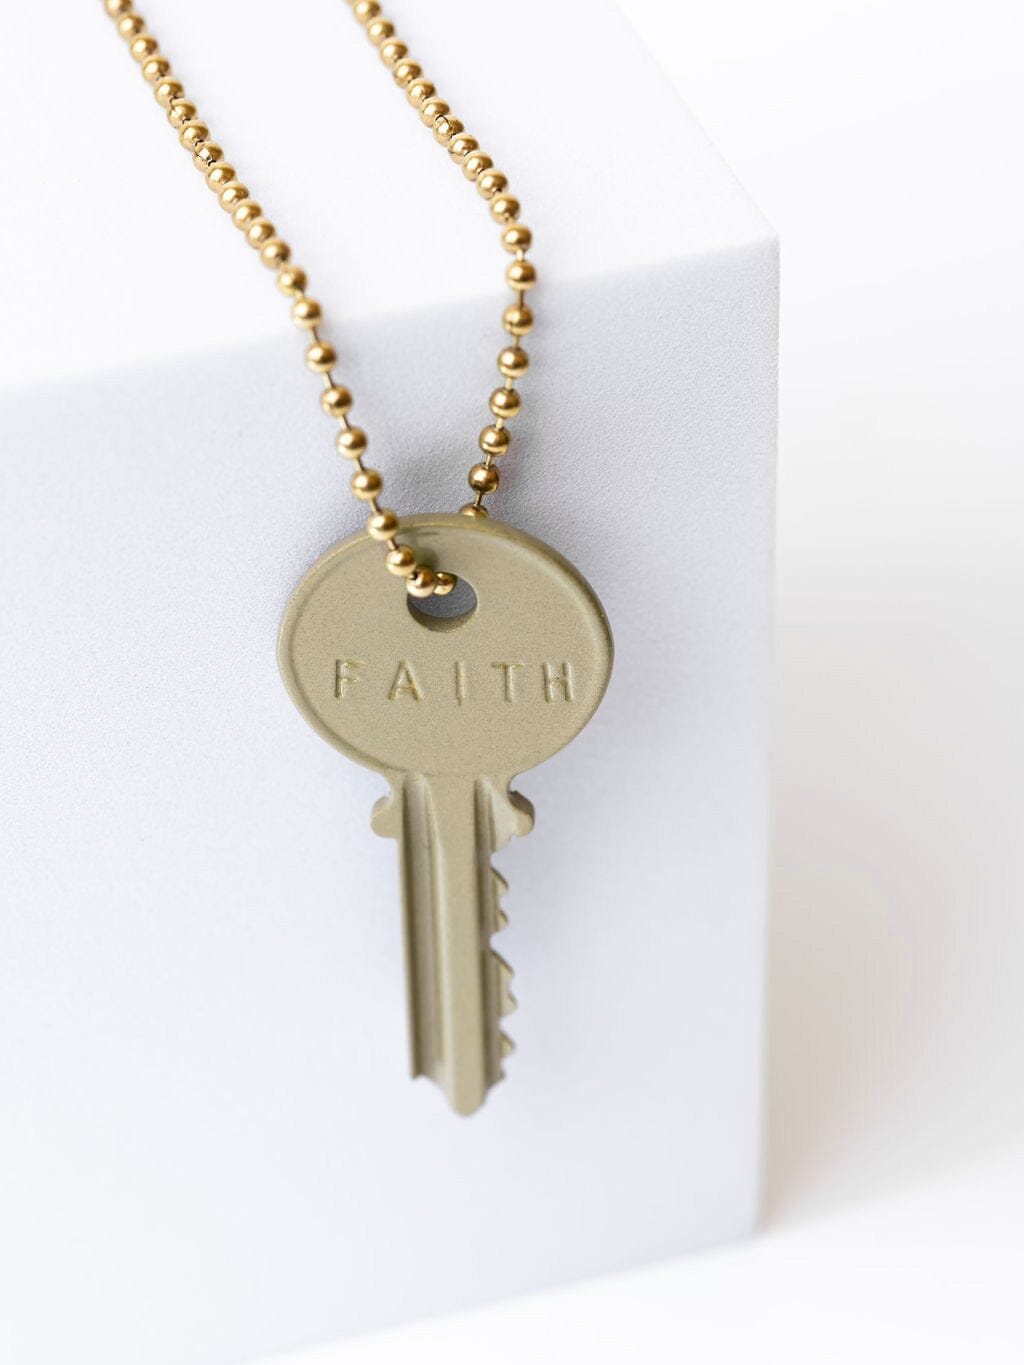 Classic Ball Chain Key Necklace